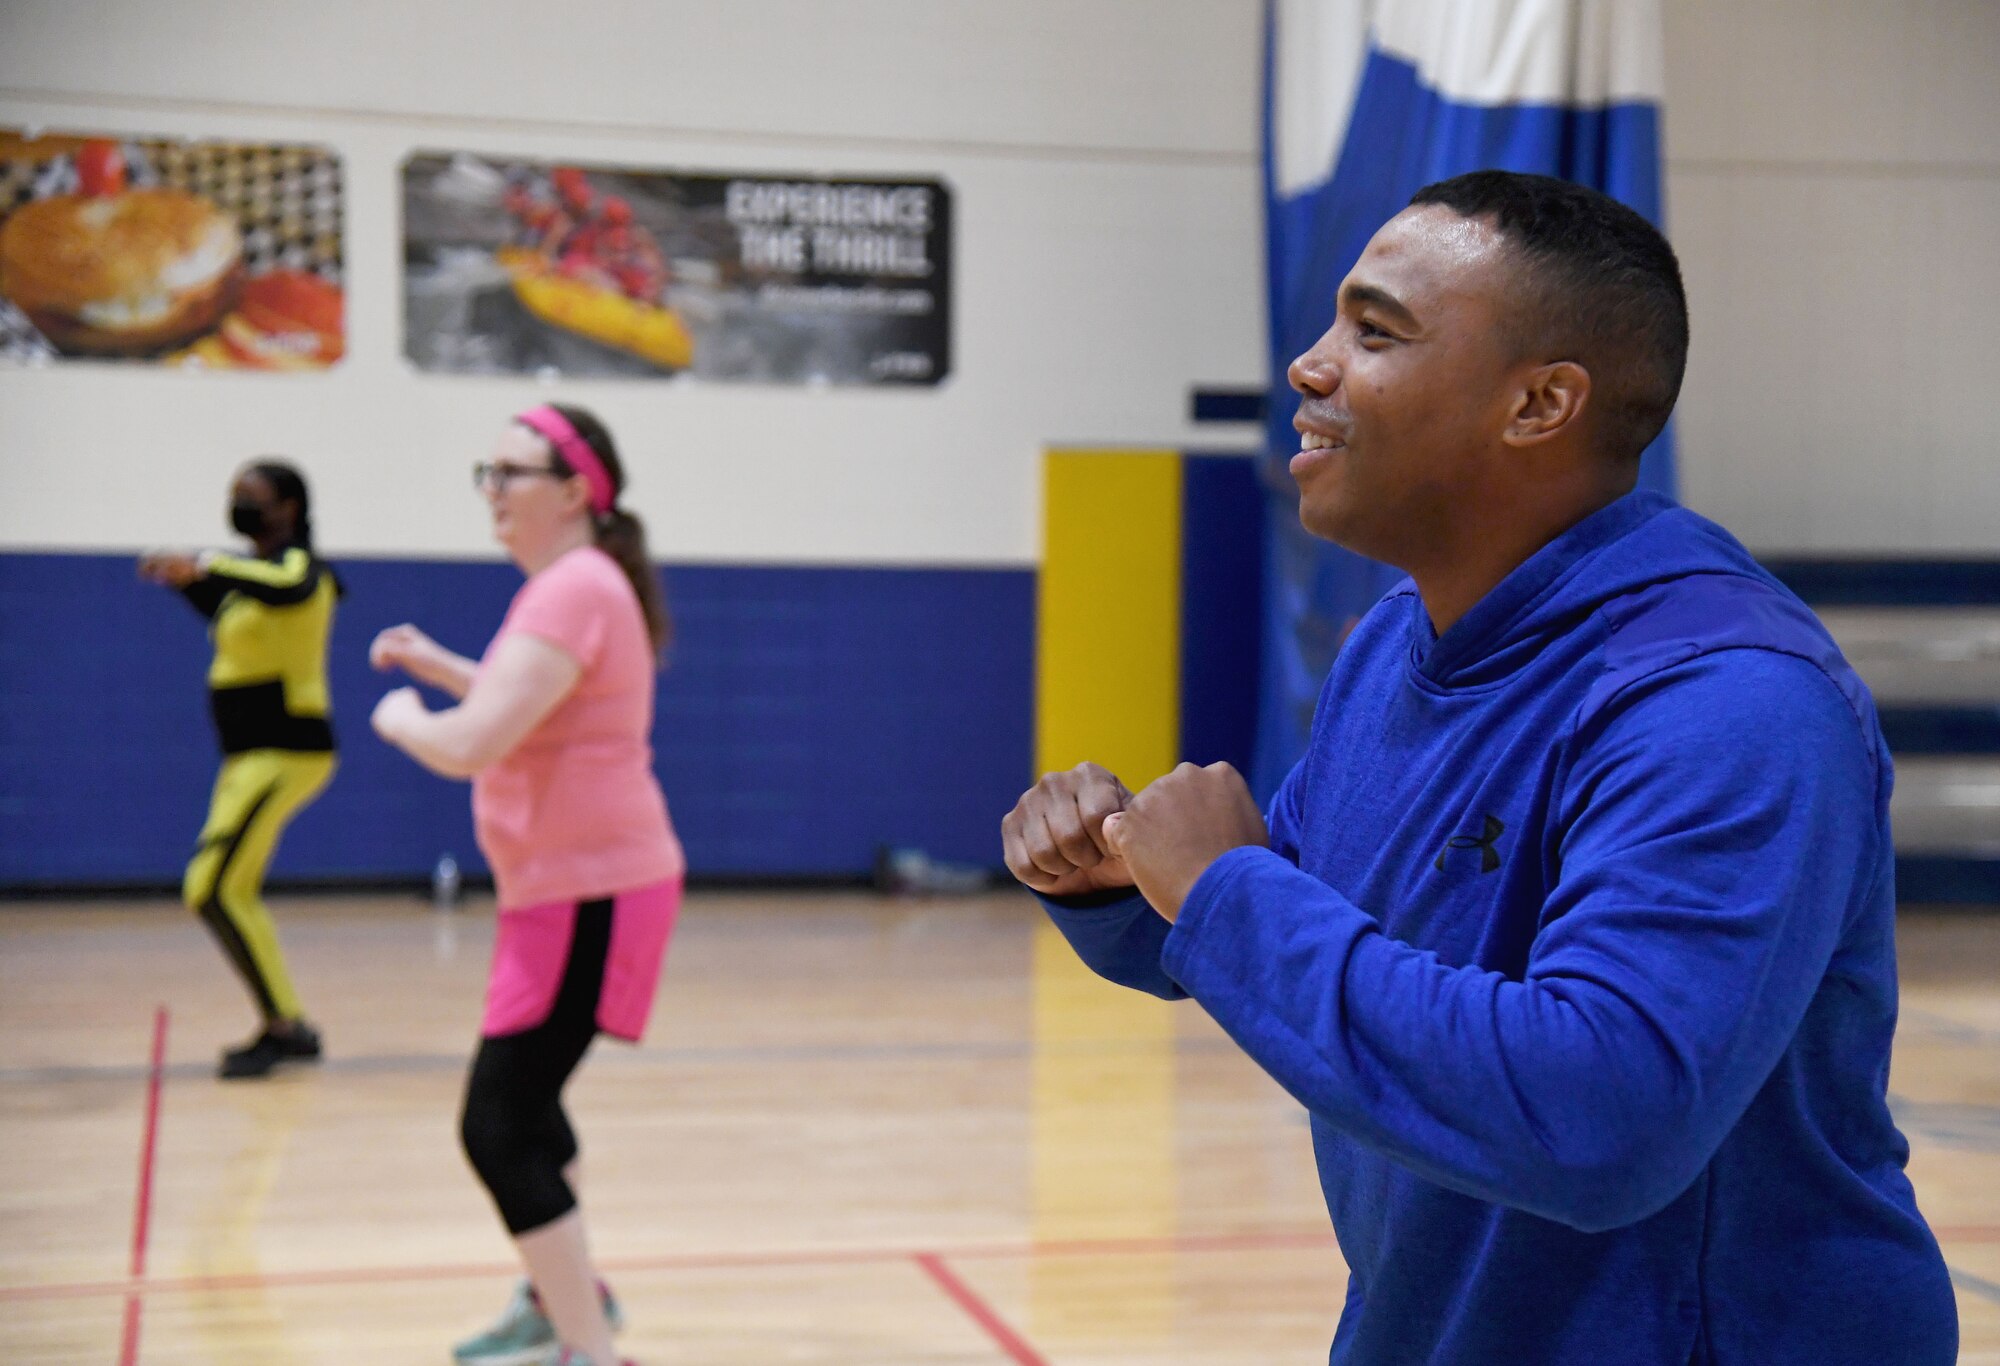 U.S. Air Force Chief Master Sgt. Kodi Bailey, 333rd Training Squadron superintendent, participates in a Zumba Dance Class inside the Blake Fitness Center at Keesler Air Force Base, Mississippi, Feb. 8, 2022. The Black History Month Observance Committee hosted event in celebration of Black History Month, which is celebrated throughout February. This year's theme is Black Health & Wellness. (U.S. Air Force photo by Kemberly Groue)